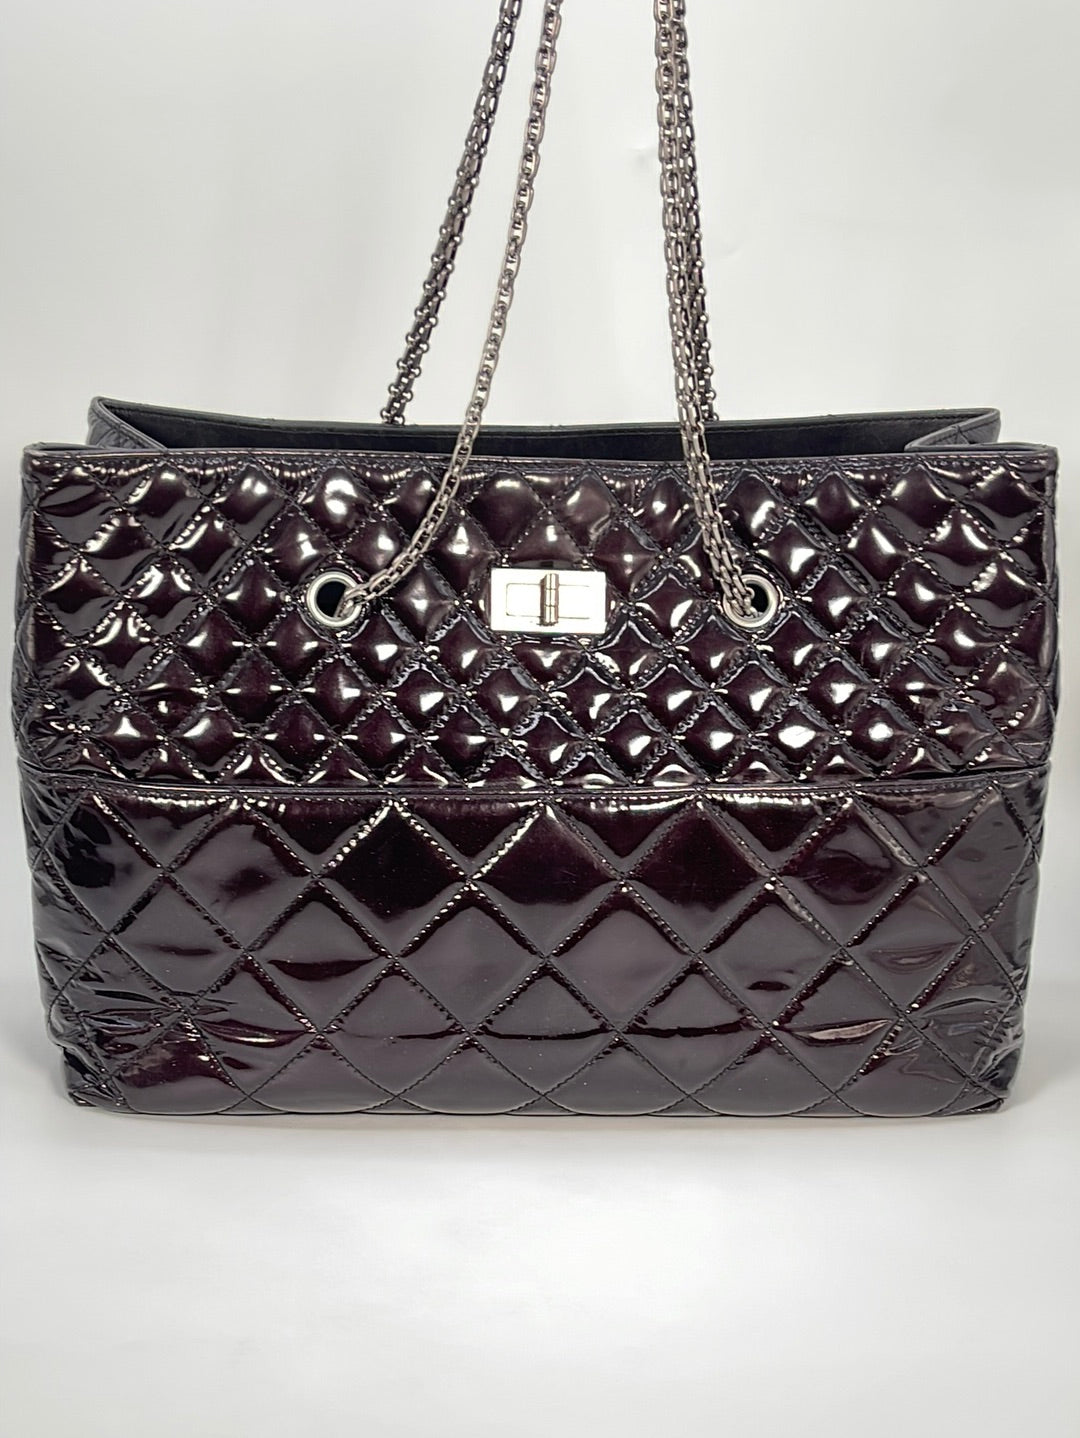 Chanel Black Quilted Glazed Caviar Leather Reissue 226 Double Flap Bag  Chanel